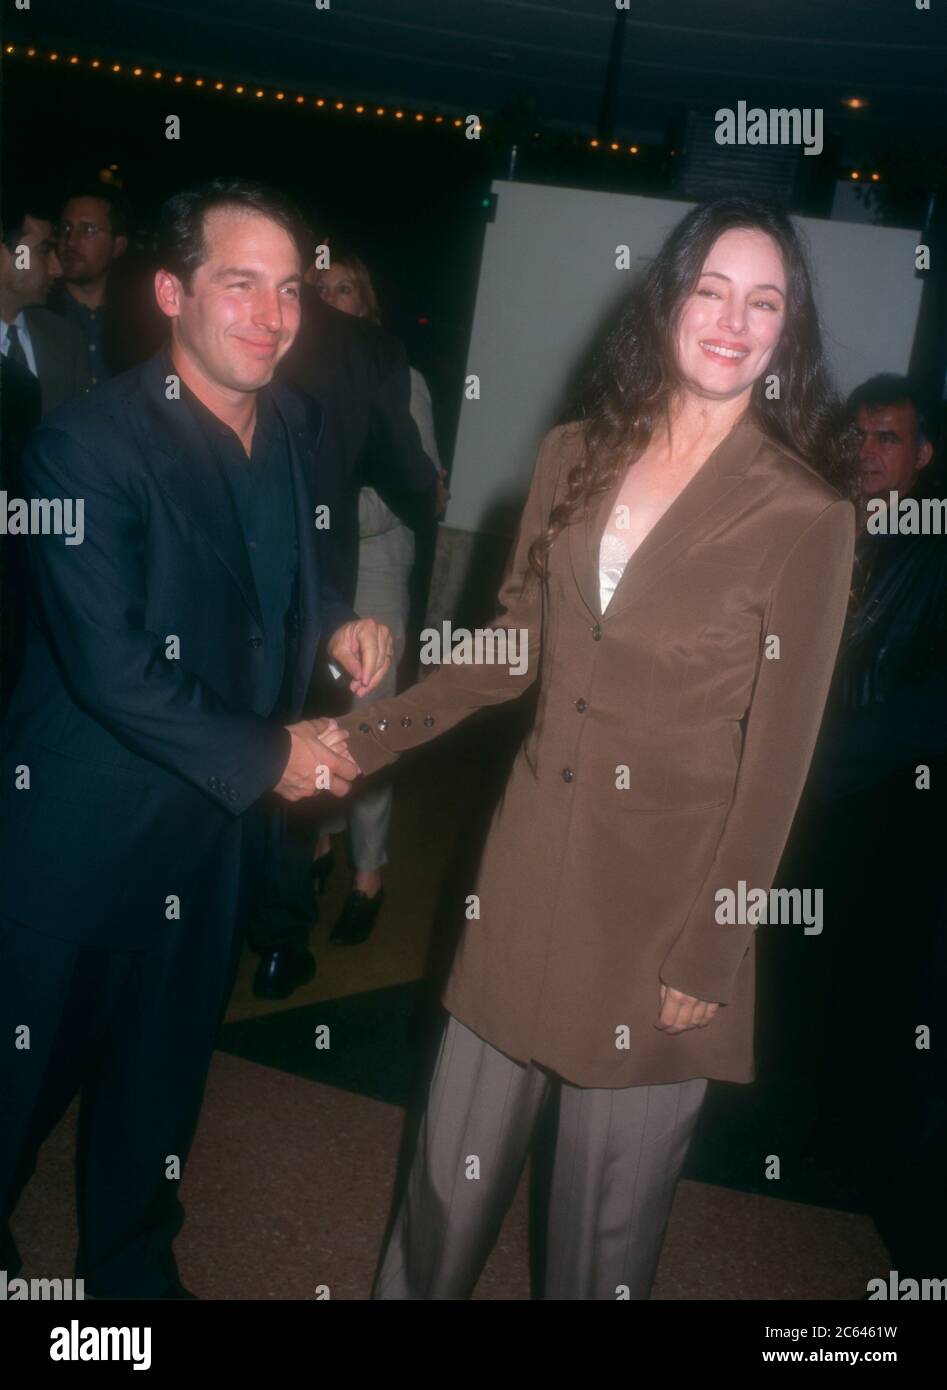 Westwood, California, USA 13th December 1995 Actor Brian Benben and actress Madeleine Stowe attend Universal Pictures' '12 Monkeys' Premiere on December 13, 1995 at Mann Bruin Theatre in Westwood, California, USA. Photo by Barry King/Alamy Stock Photo Stock Photo